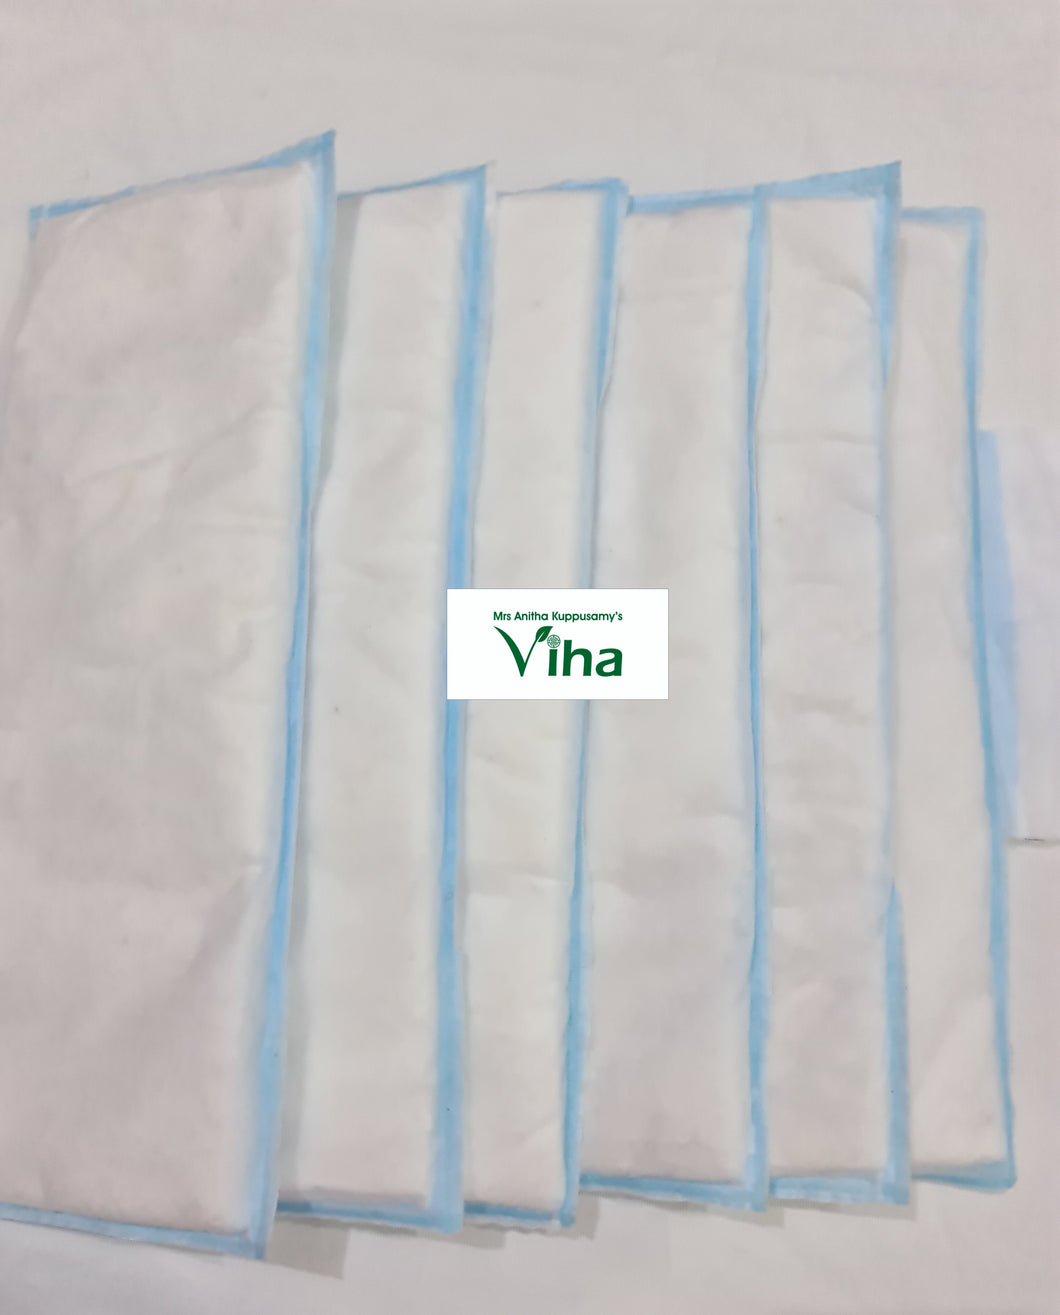 Herbal Sanitary Napkin With Wings Large (6 Pieces)